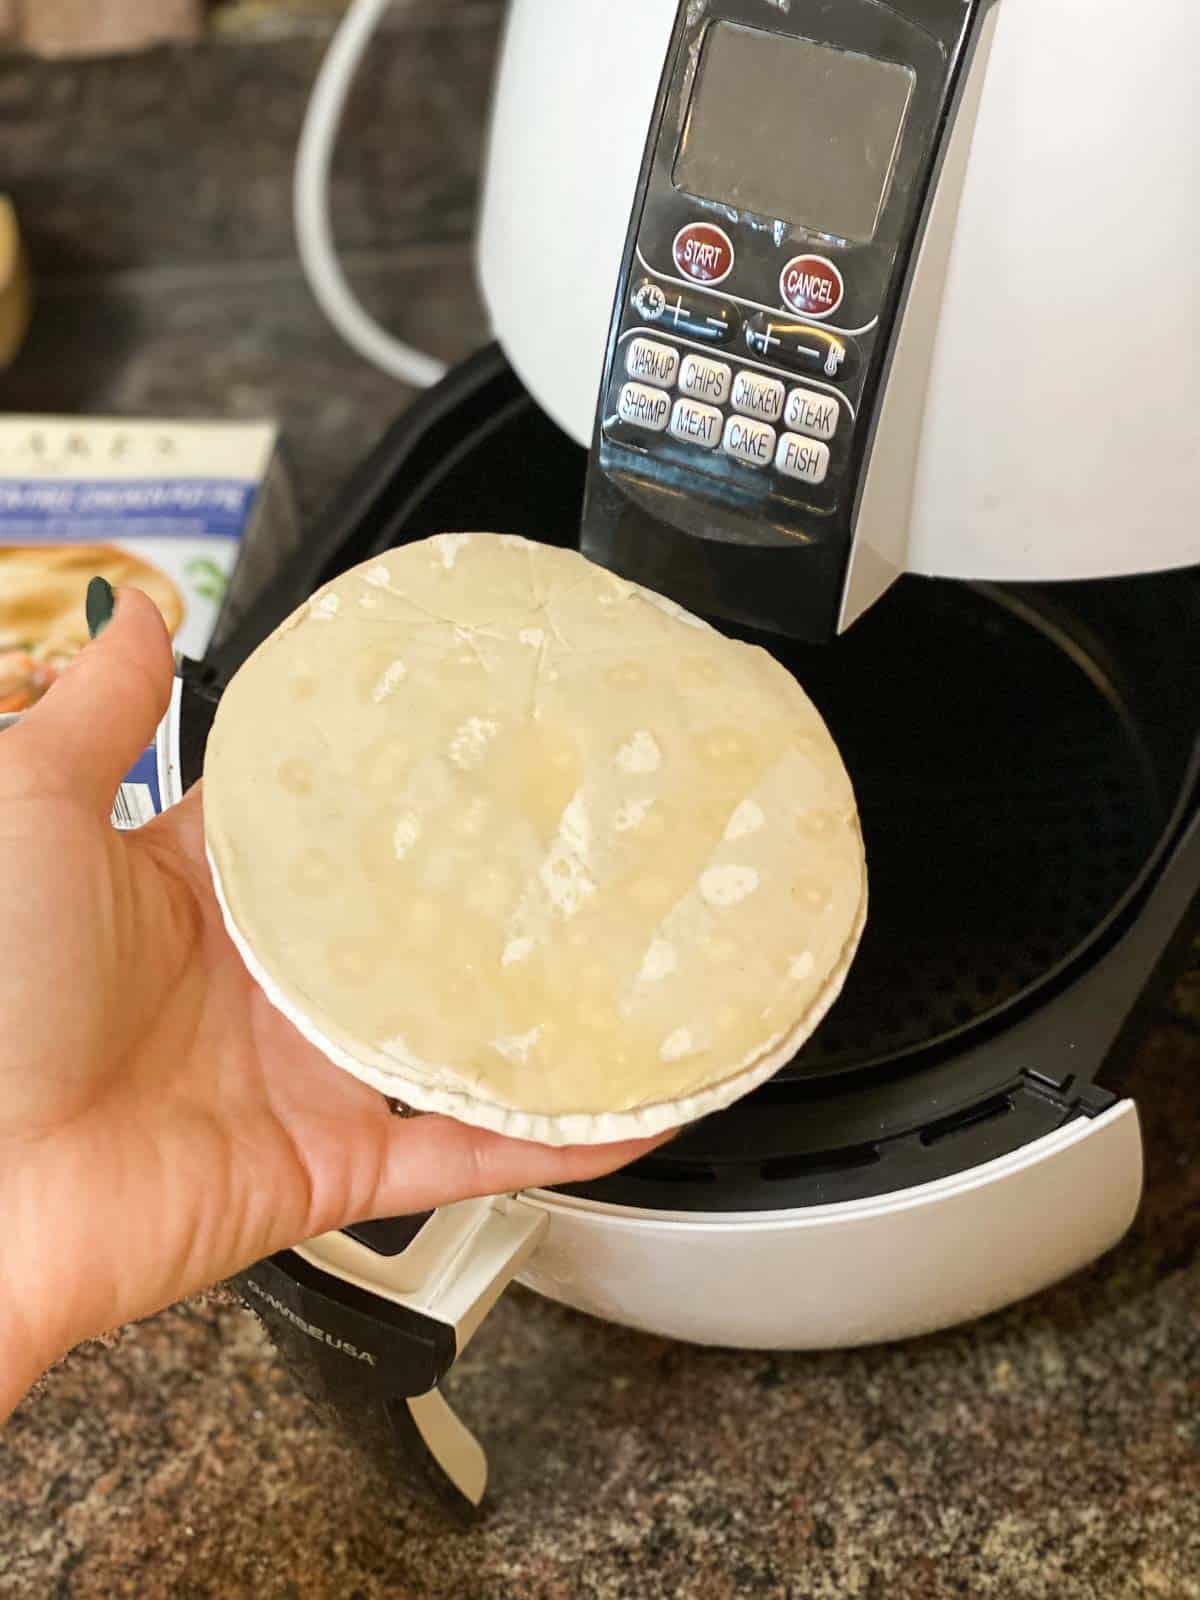 Pot pie in air fryer before cooked